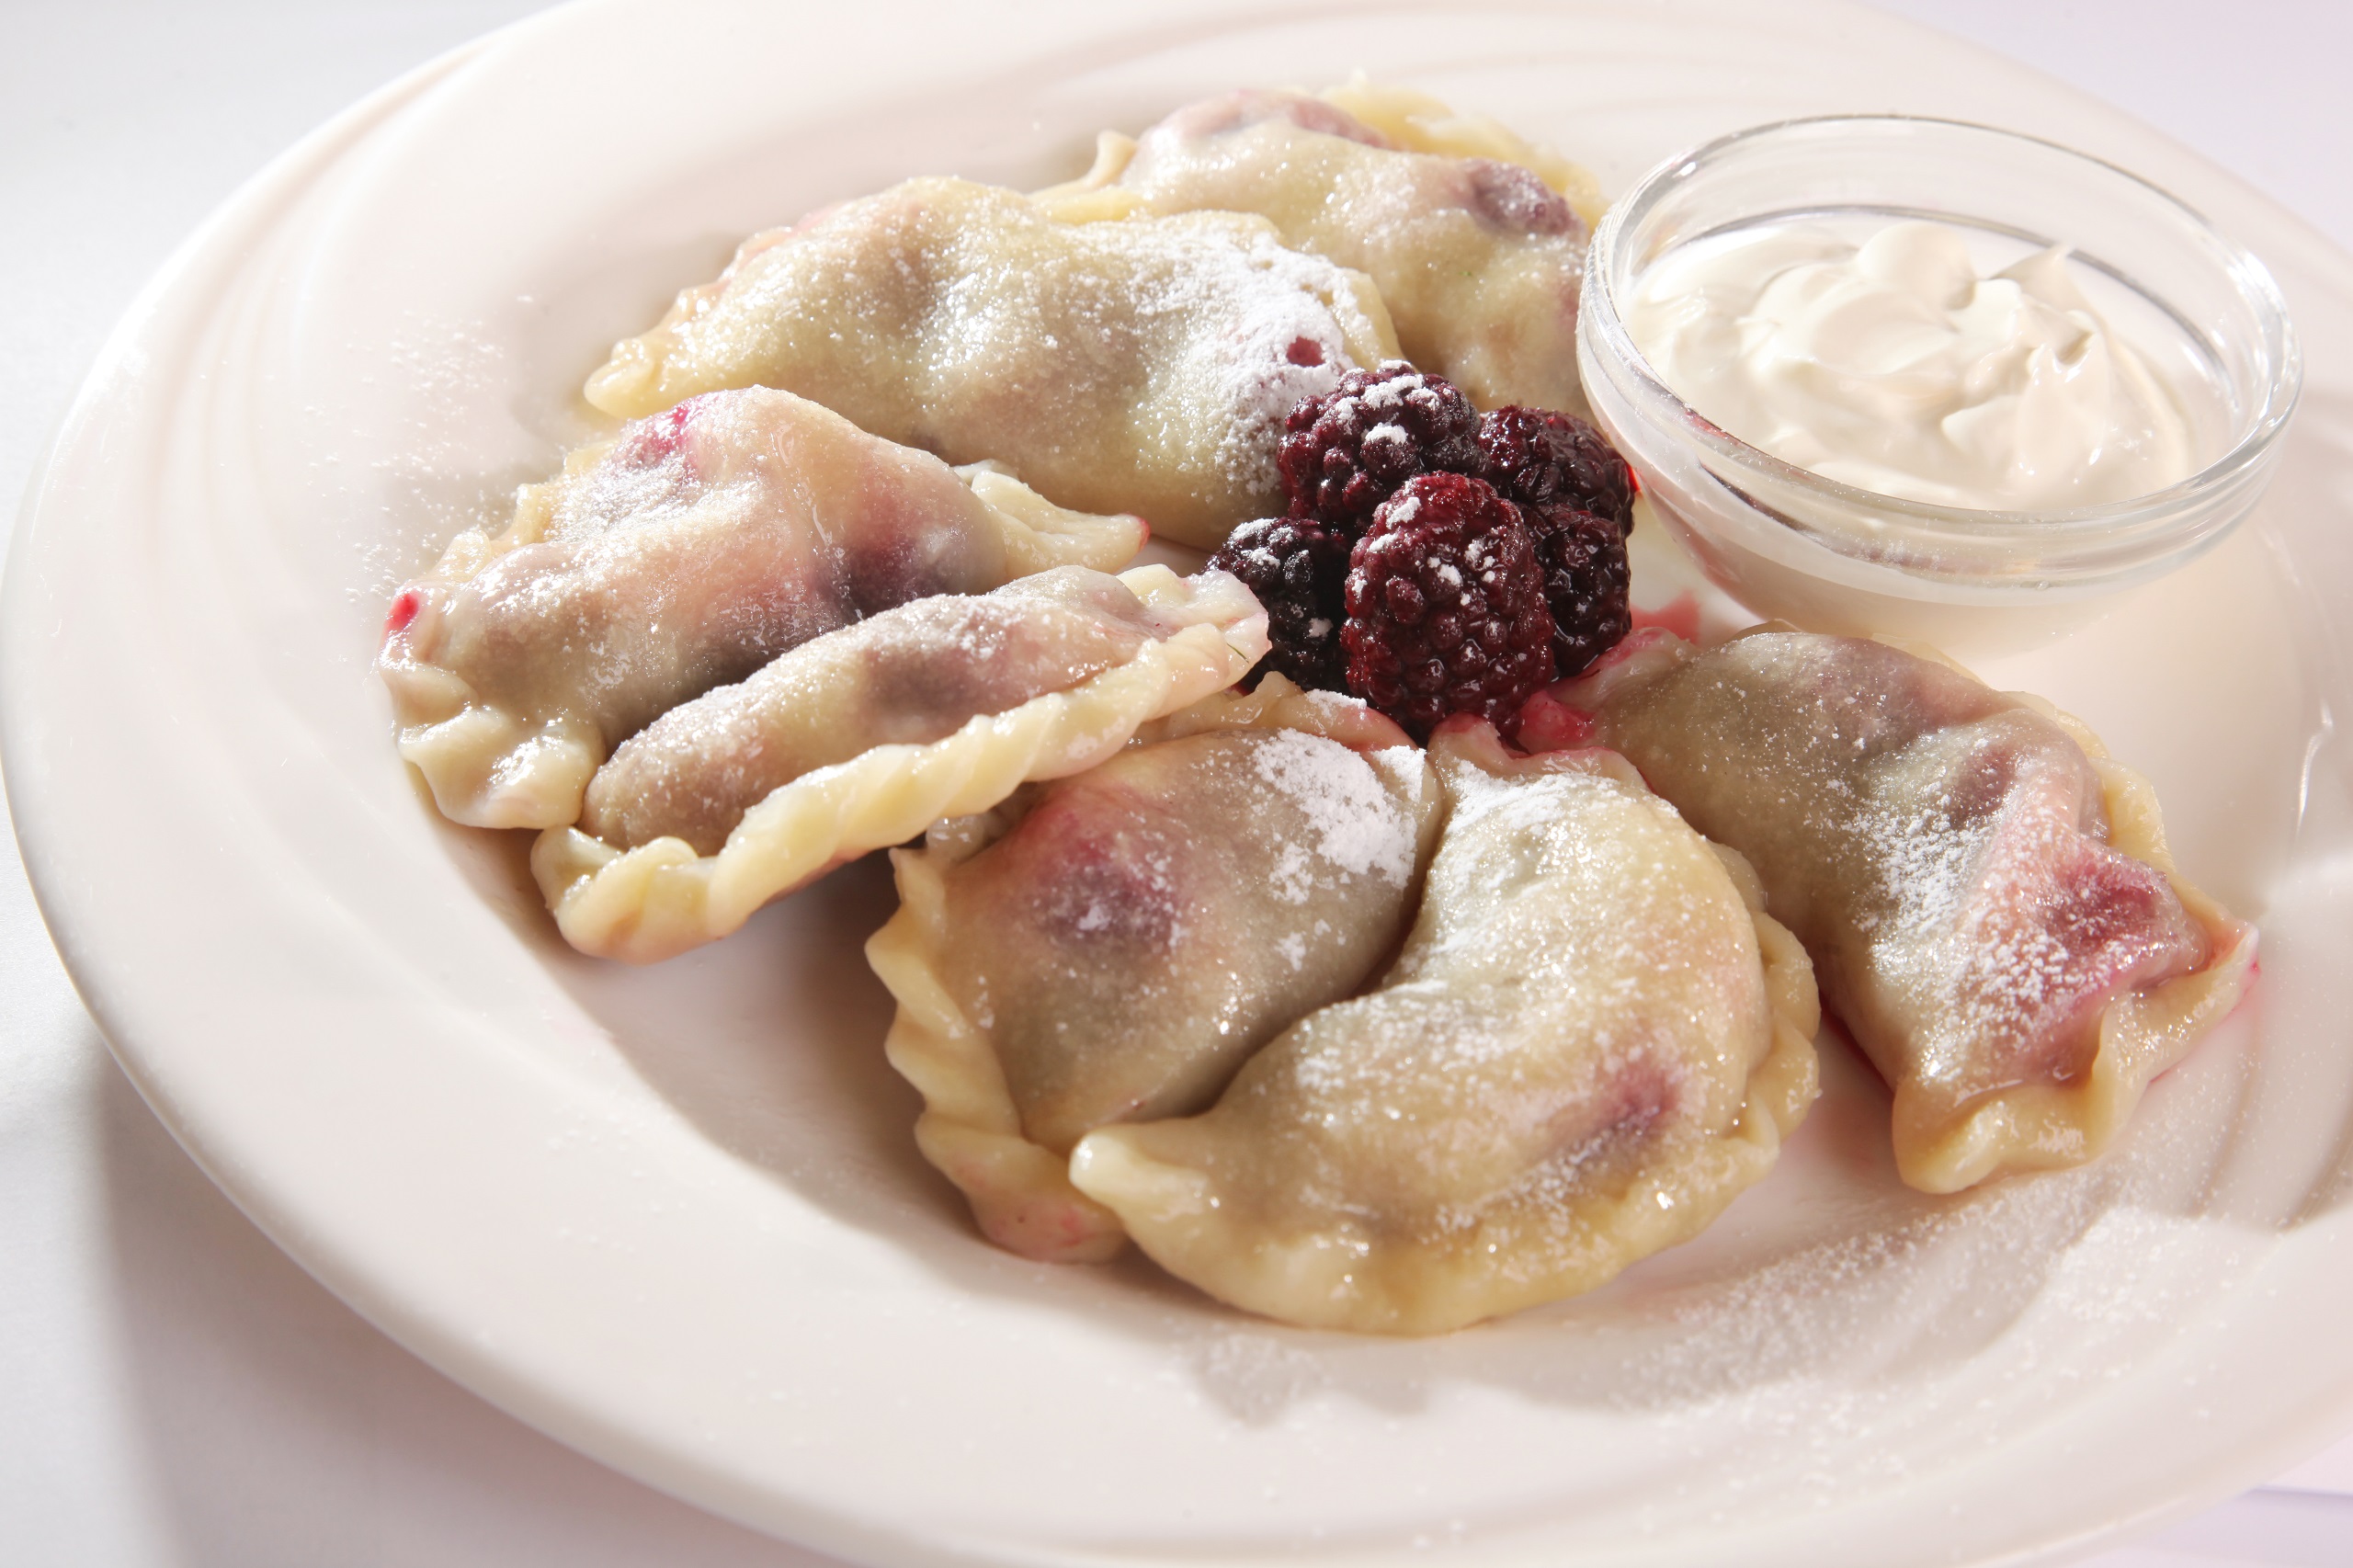 Several pierogies with rasberry filling, topped with rasberries and sprinkled with sugar, neatly arranged on a plate served with a small side of sour cream.